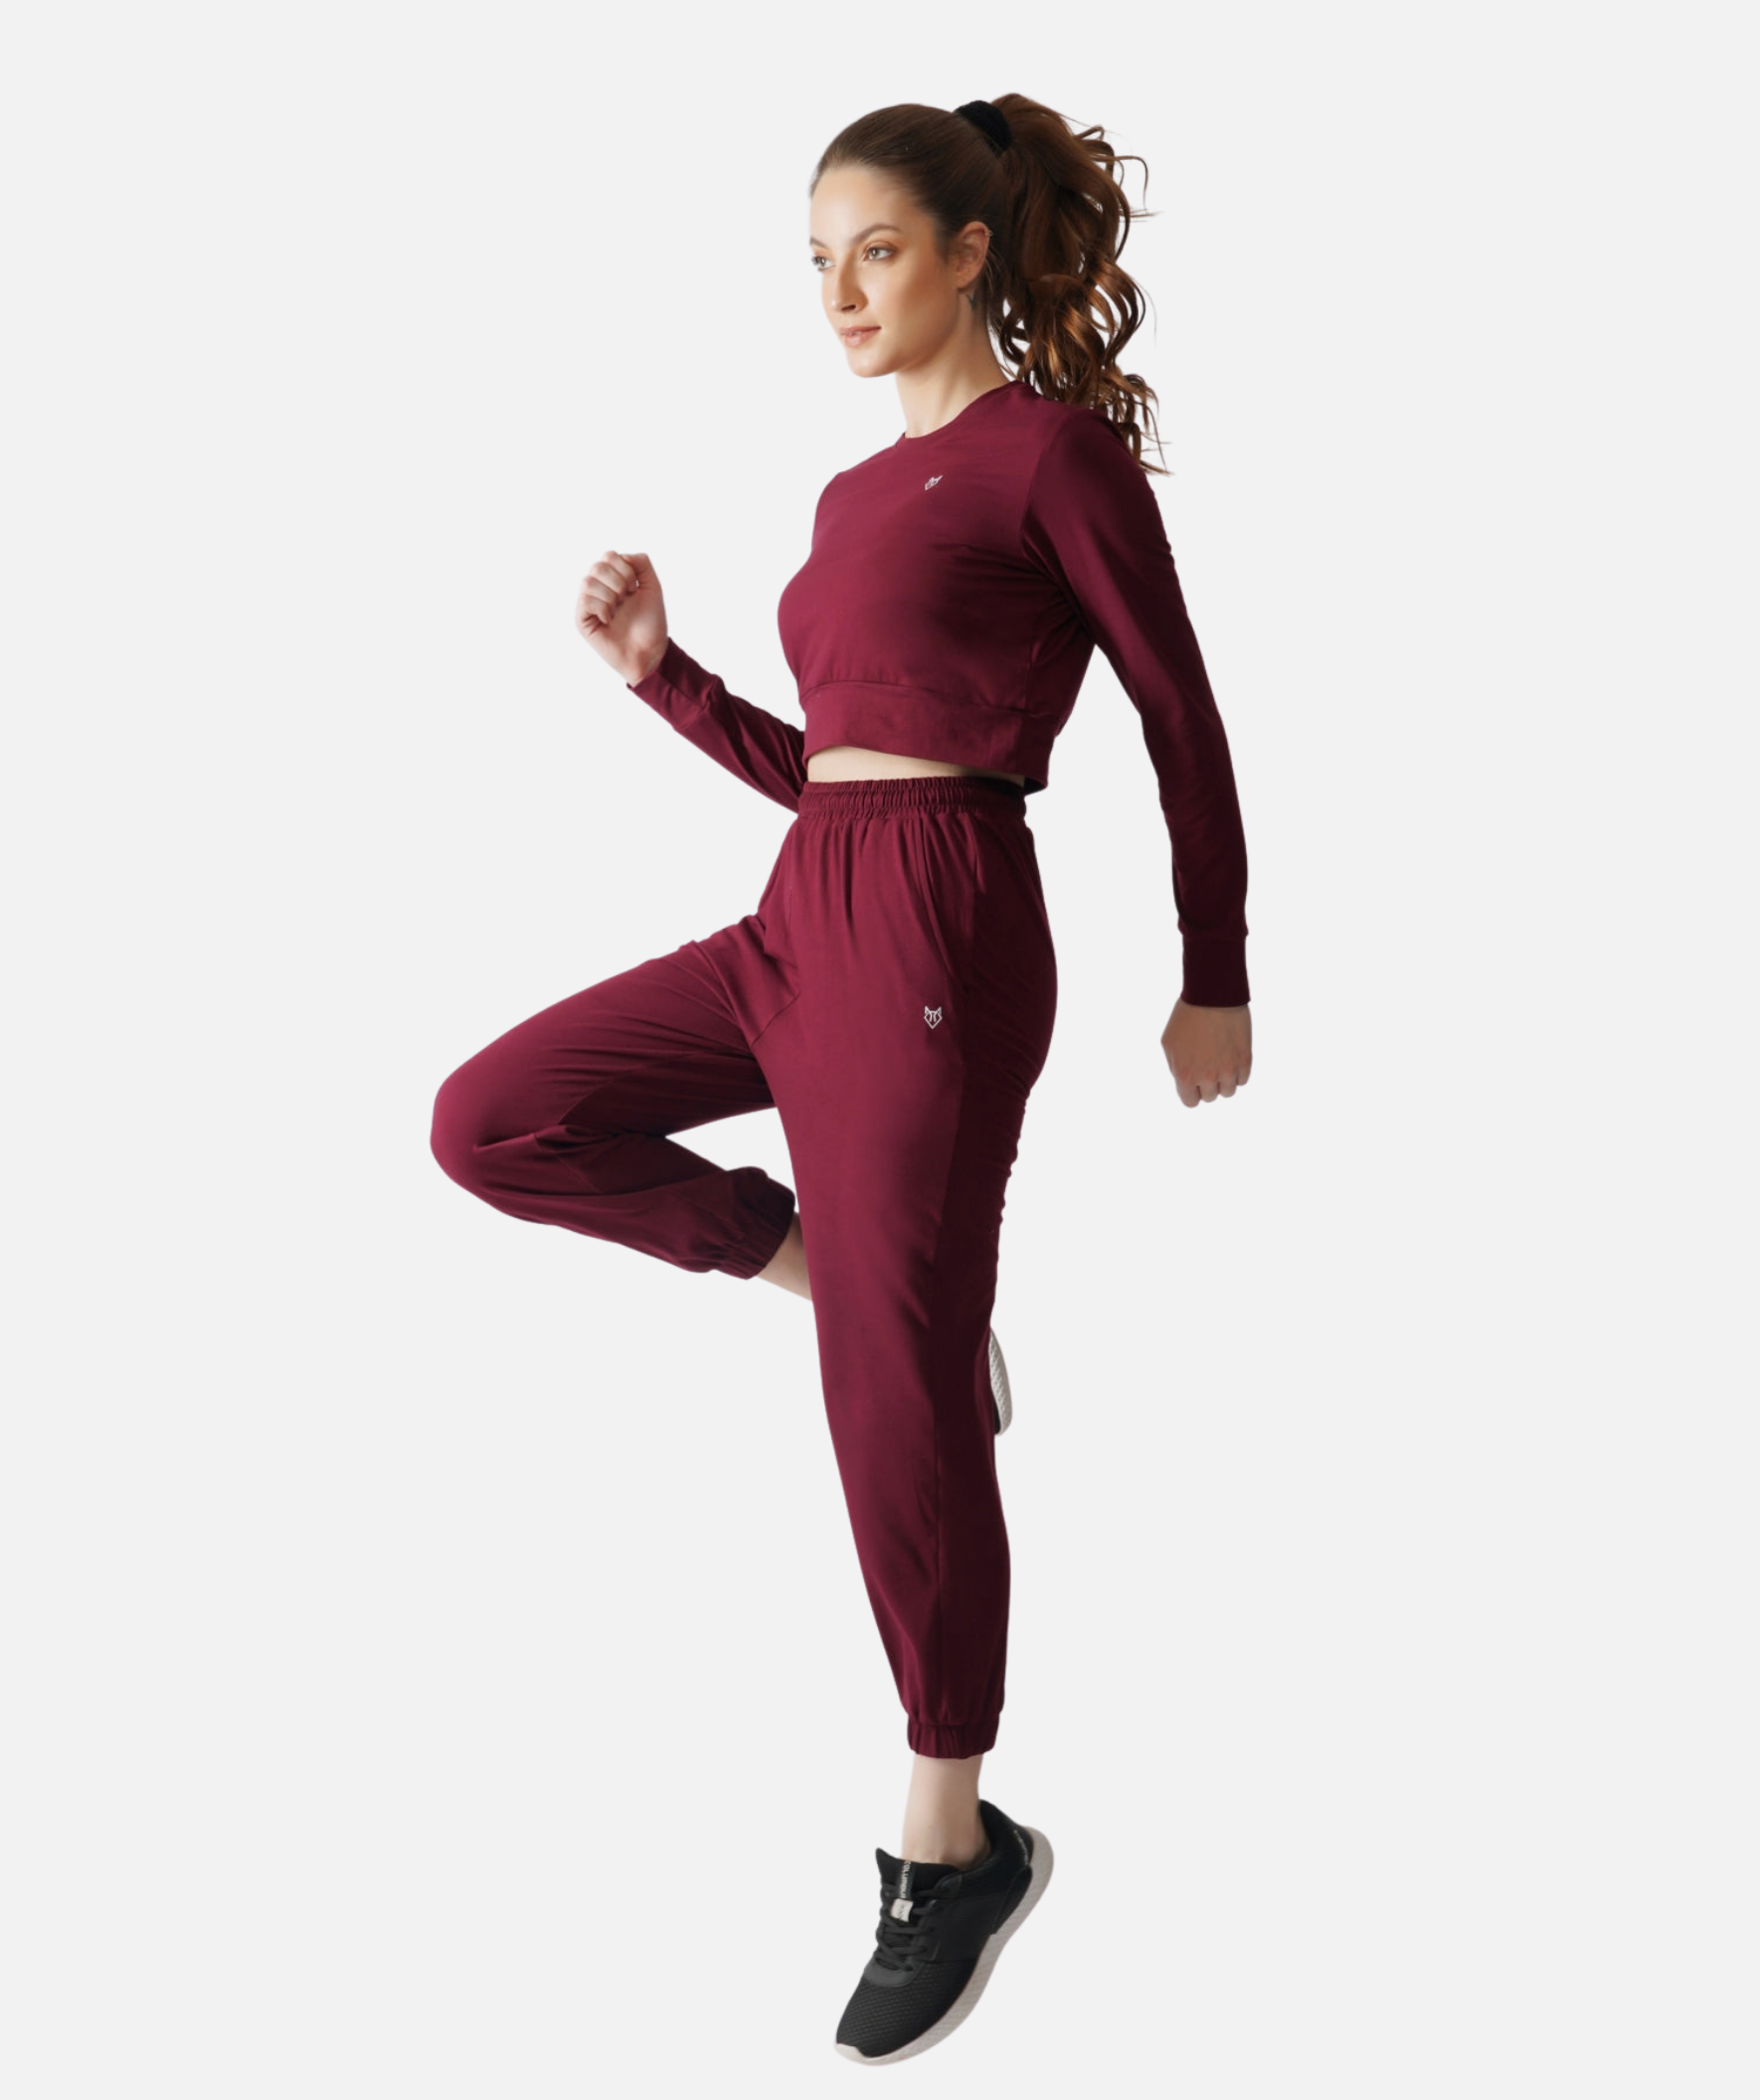 Aerobic Women's Full Sleeve Crop Top and Jogger Gym Wear Set Top and Bottom Set